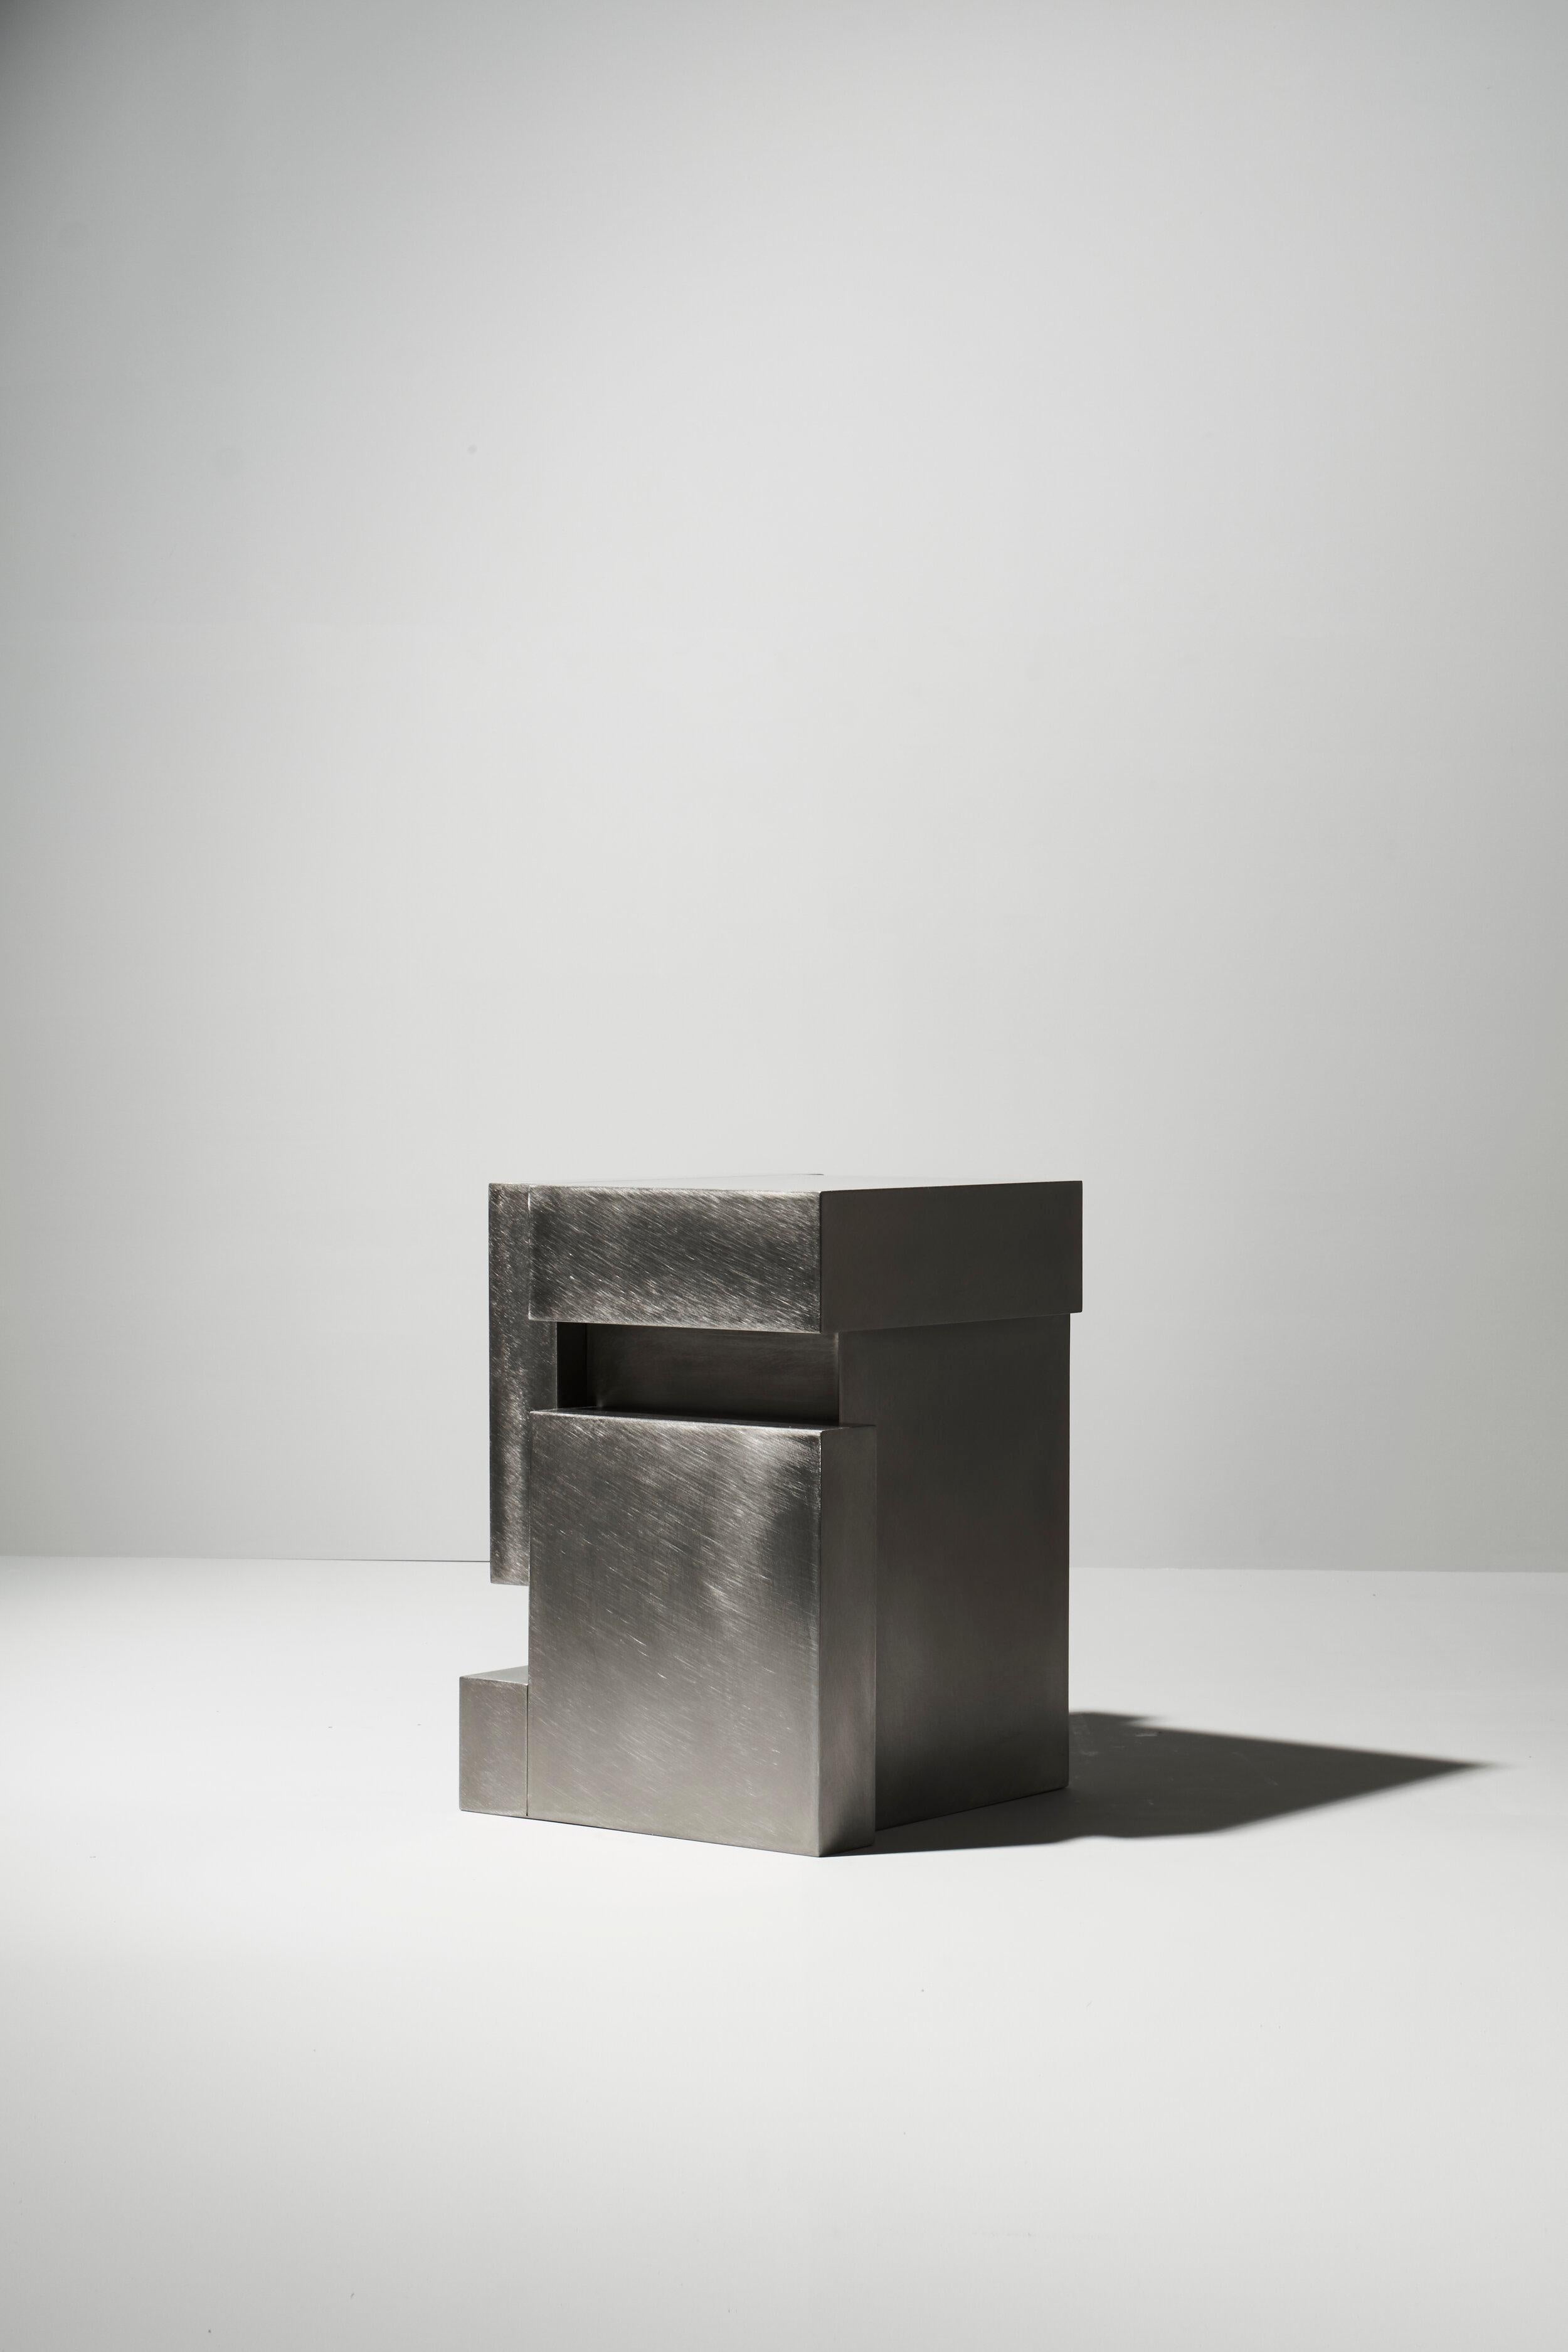 Layered steel seat VIII by Hyungshin Hwang.
Dimensions: D 30 x W 33 x H 42 cm
Materials: stainless steel

Layered Series is the main theme and concept of work of Hwang, who continues his experiment which is based on architectural composition of